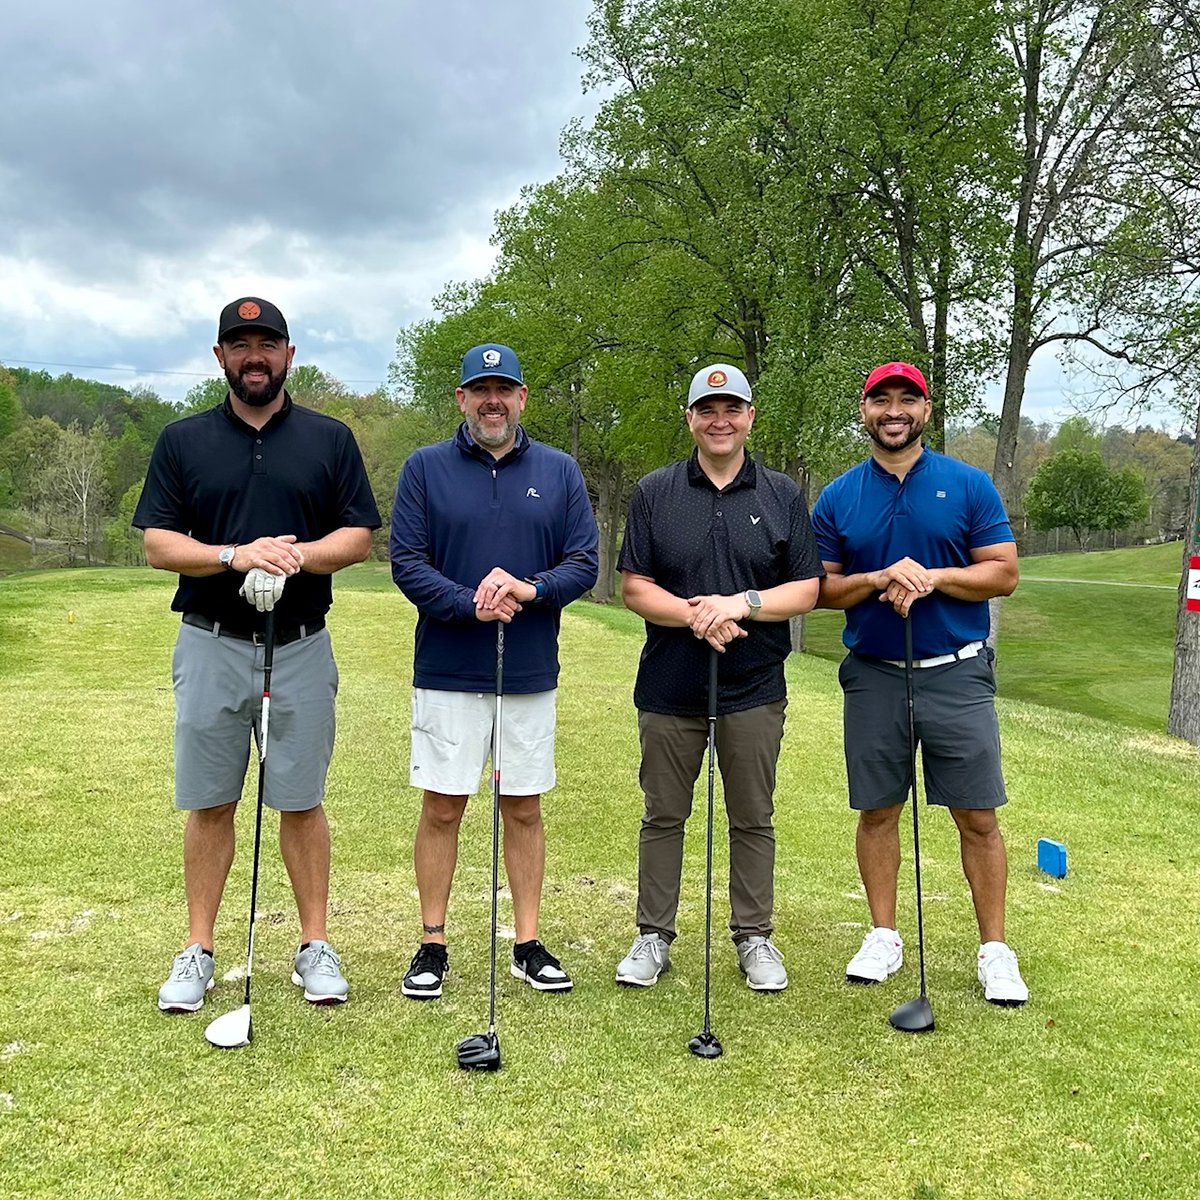 Team CNB had so much fun playing in the golf scramble fundraiser for Shopville Elementary School yesterday at Eagles Nest Country Club! #cnbsomerset #movingforwardtogether #cnbcares